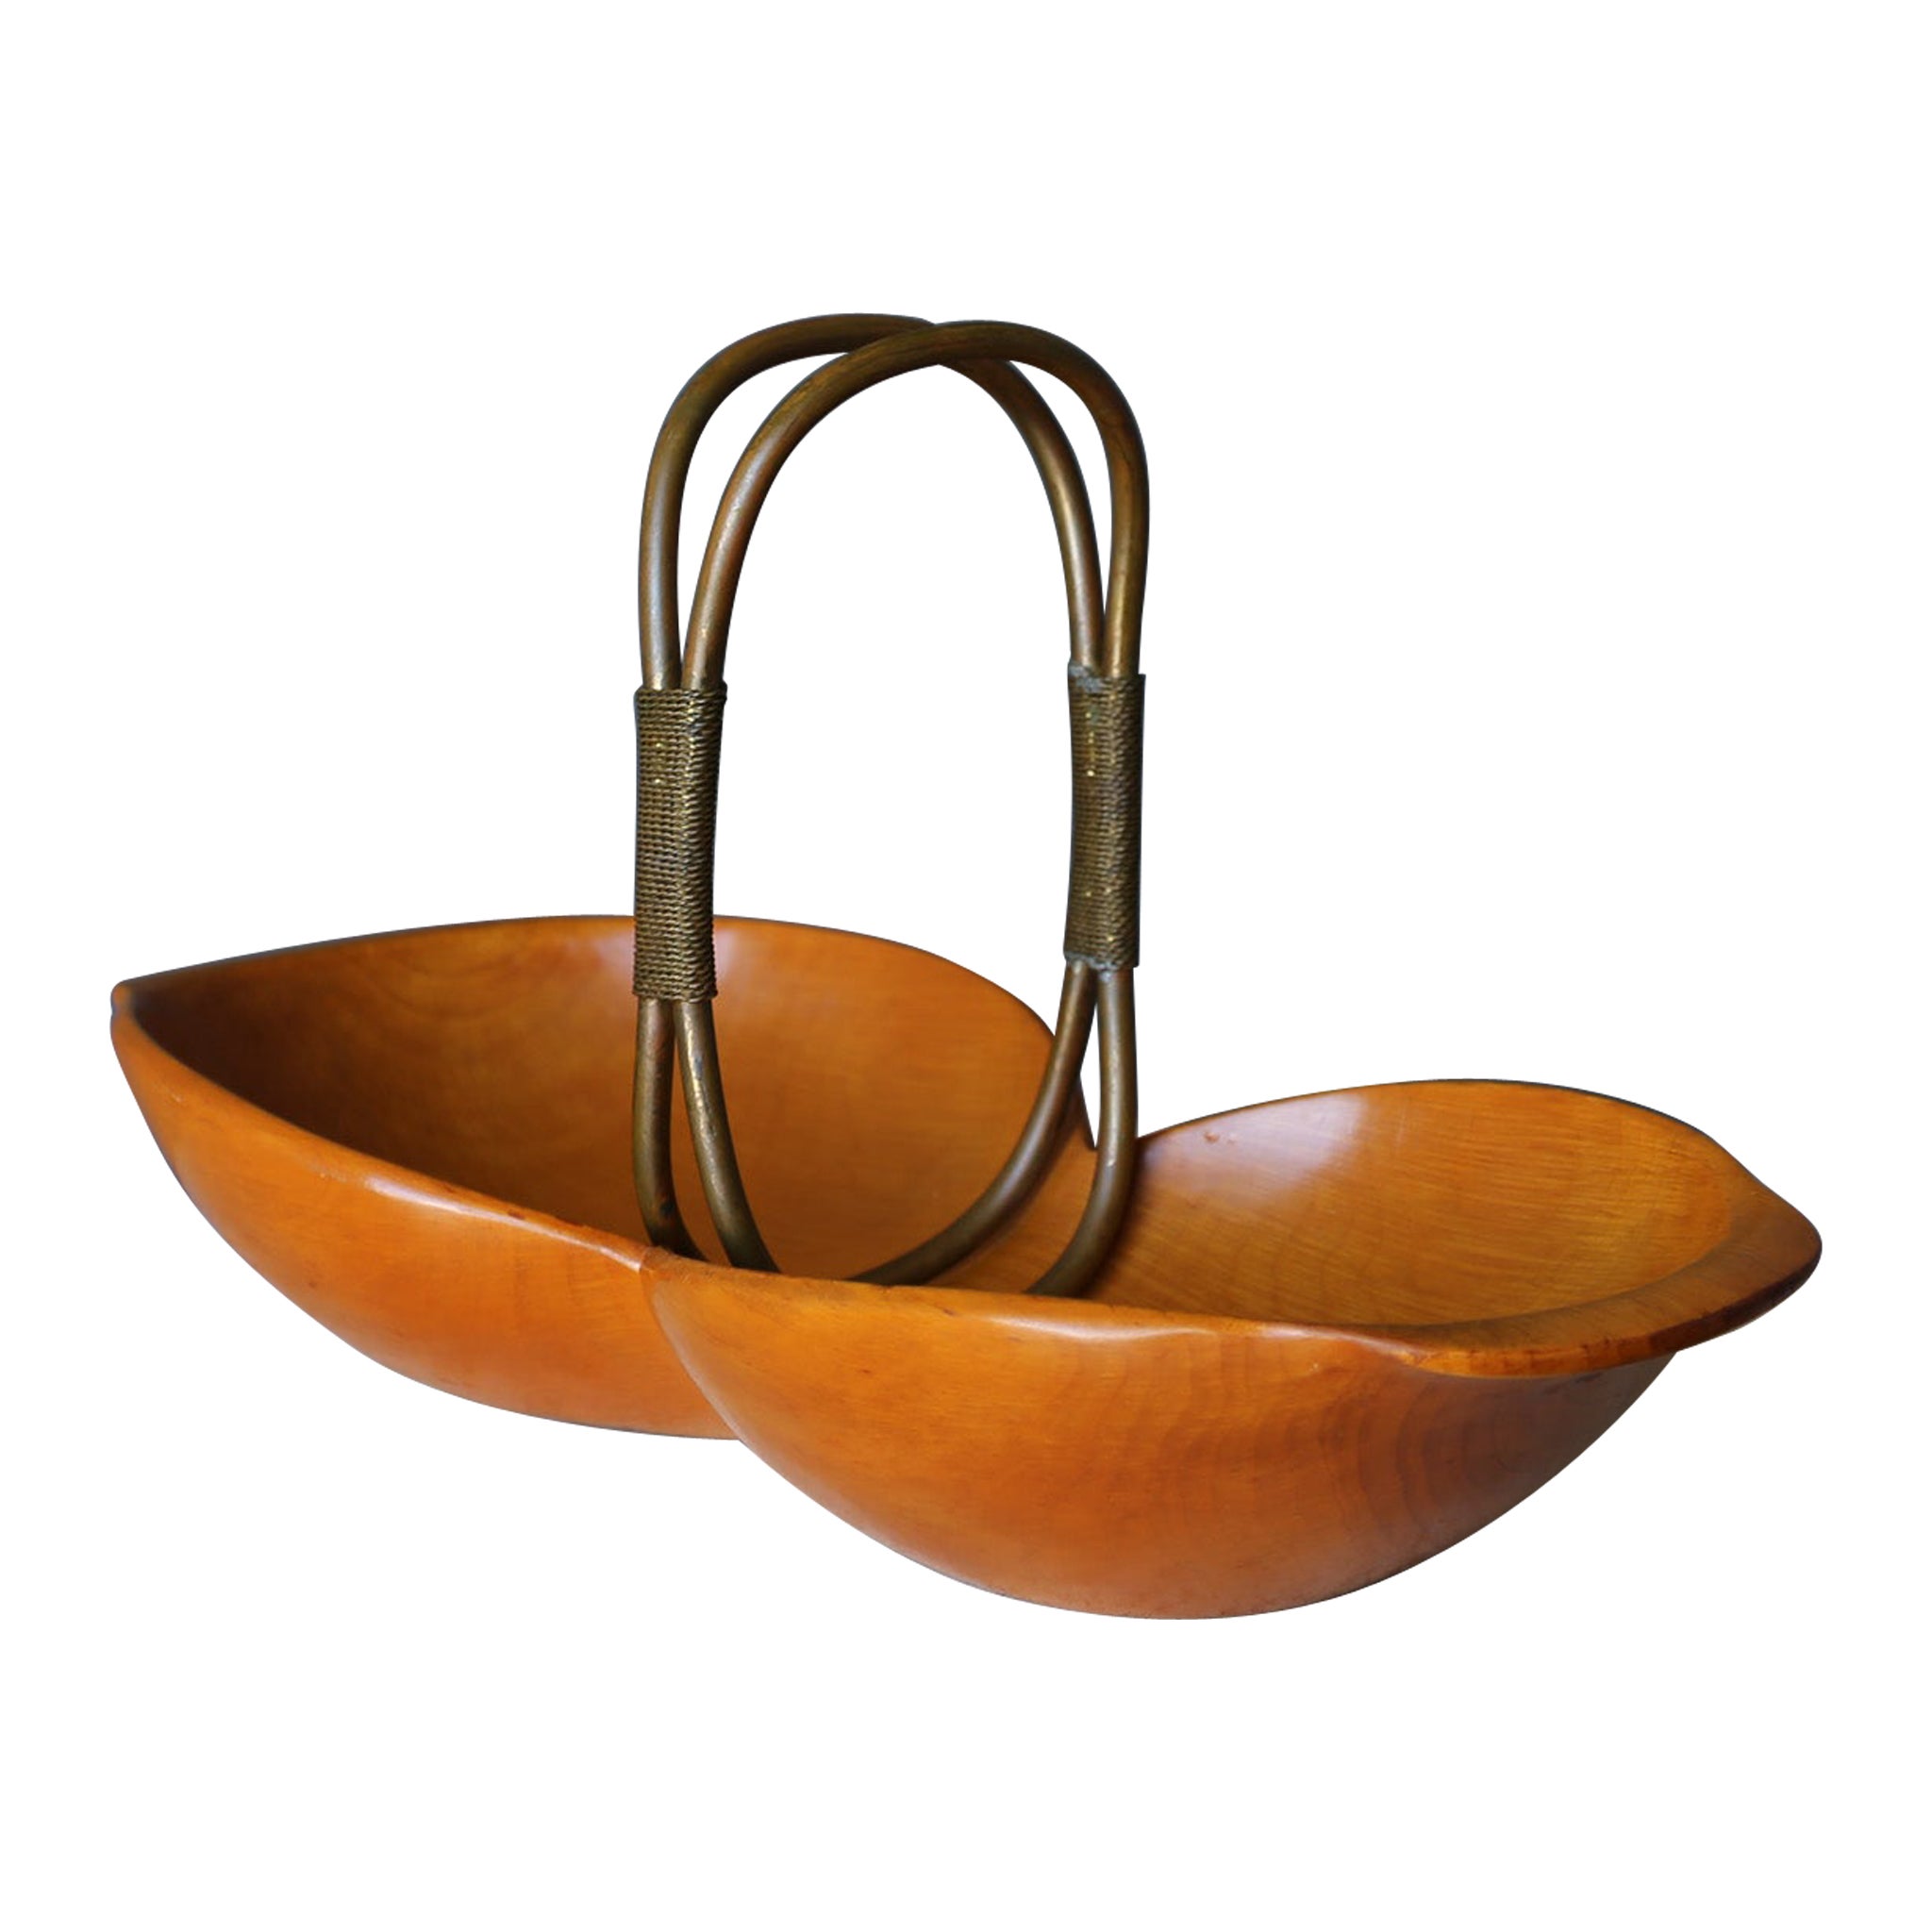 Aldo Tura Carved Walnut Wood & Brass Bowl for Macabo, Italy, c.1970 For Sale